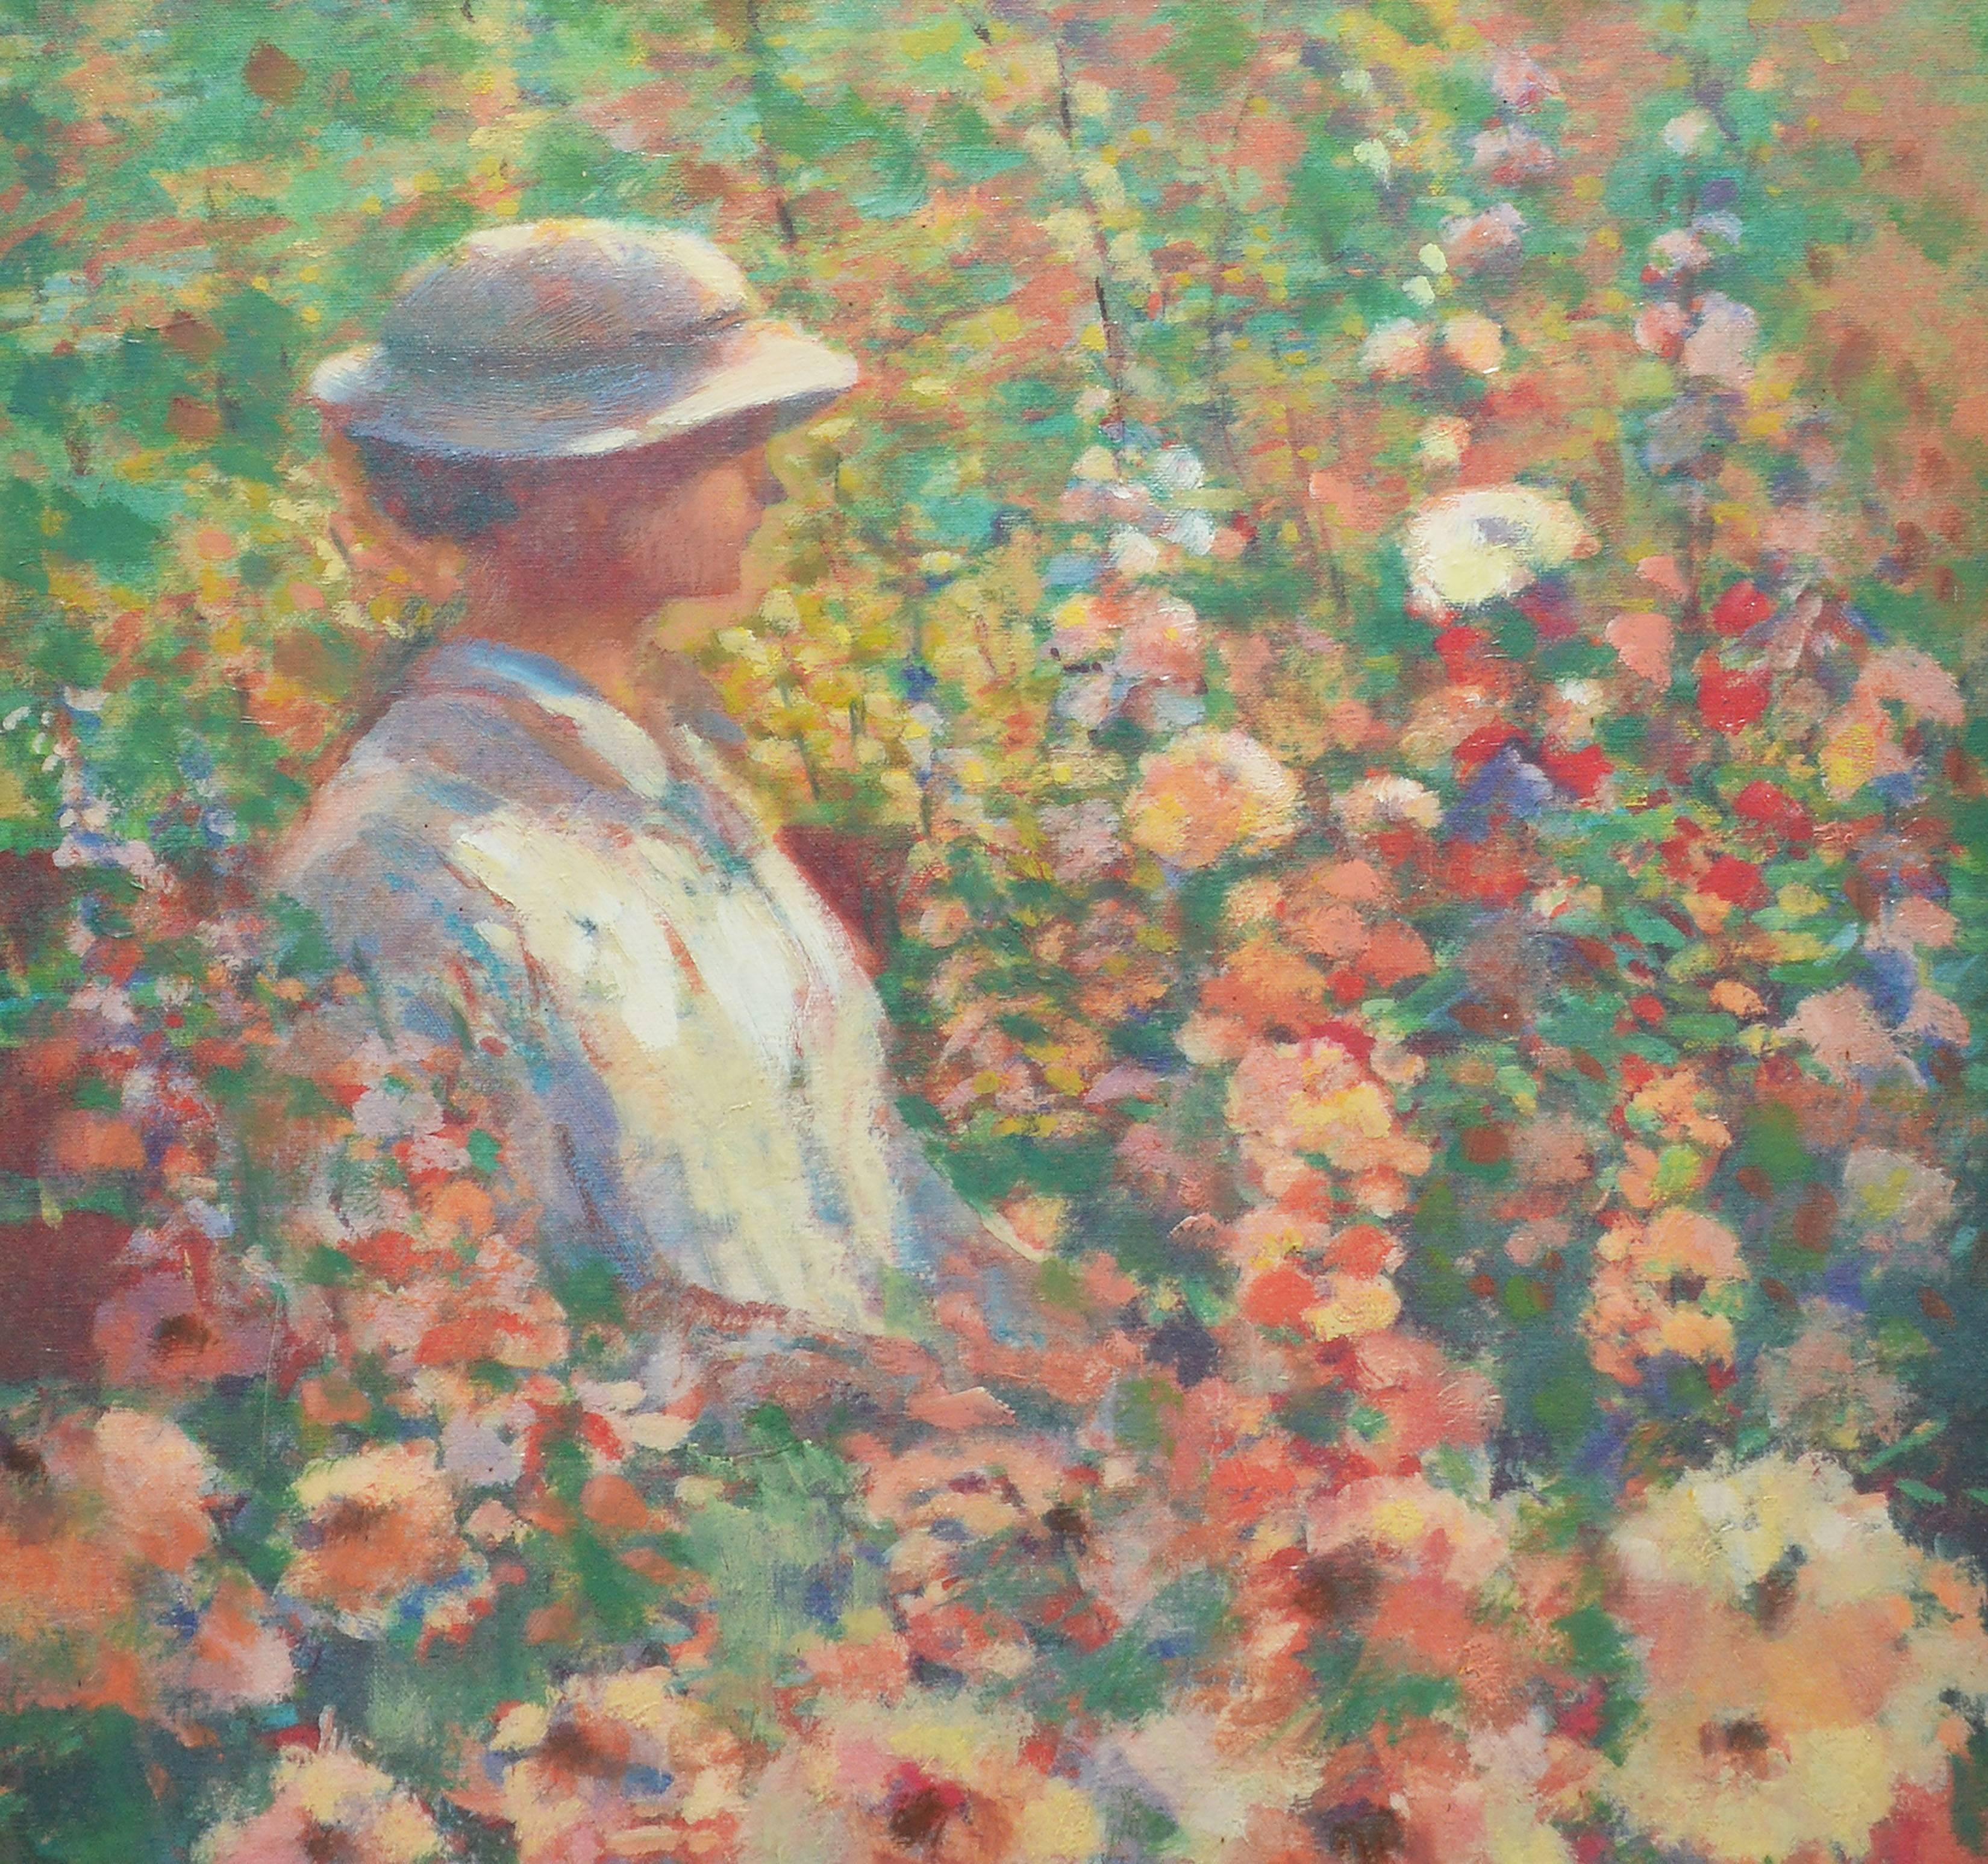 Portrait among the Hollyhocks, by Donald Roy Purdy 3